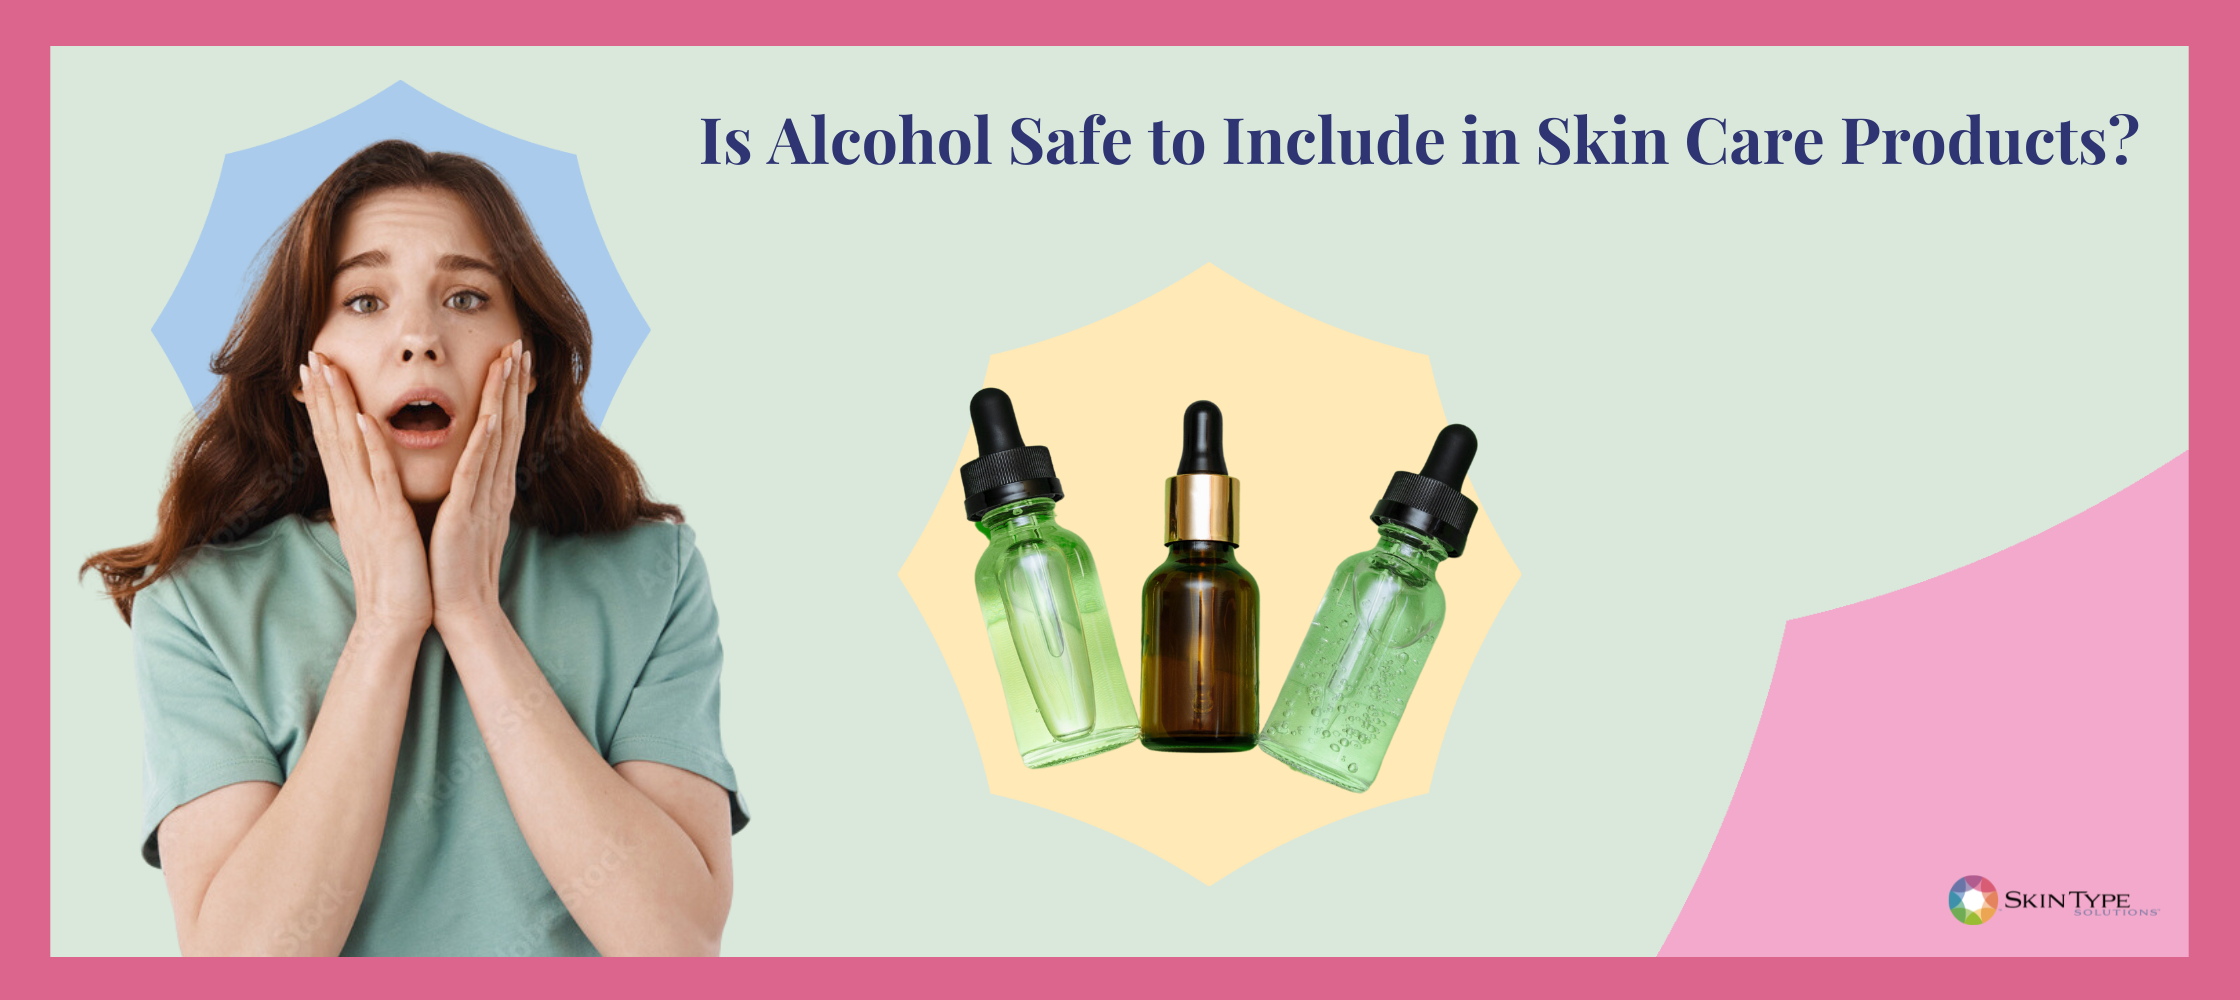 Good Alcohols for Skin